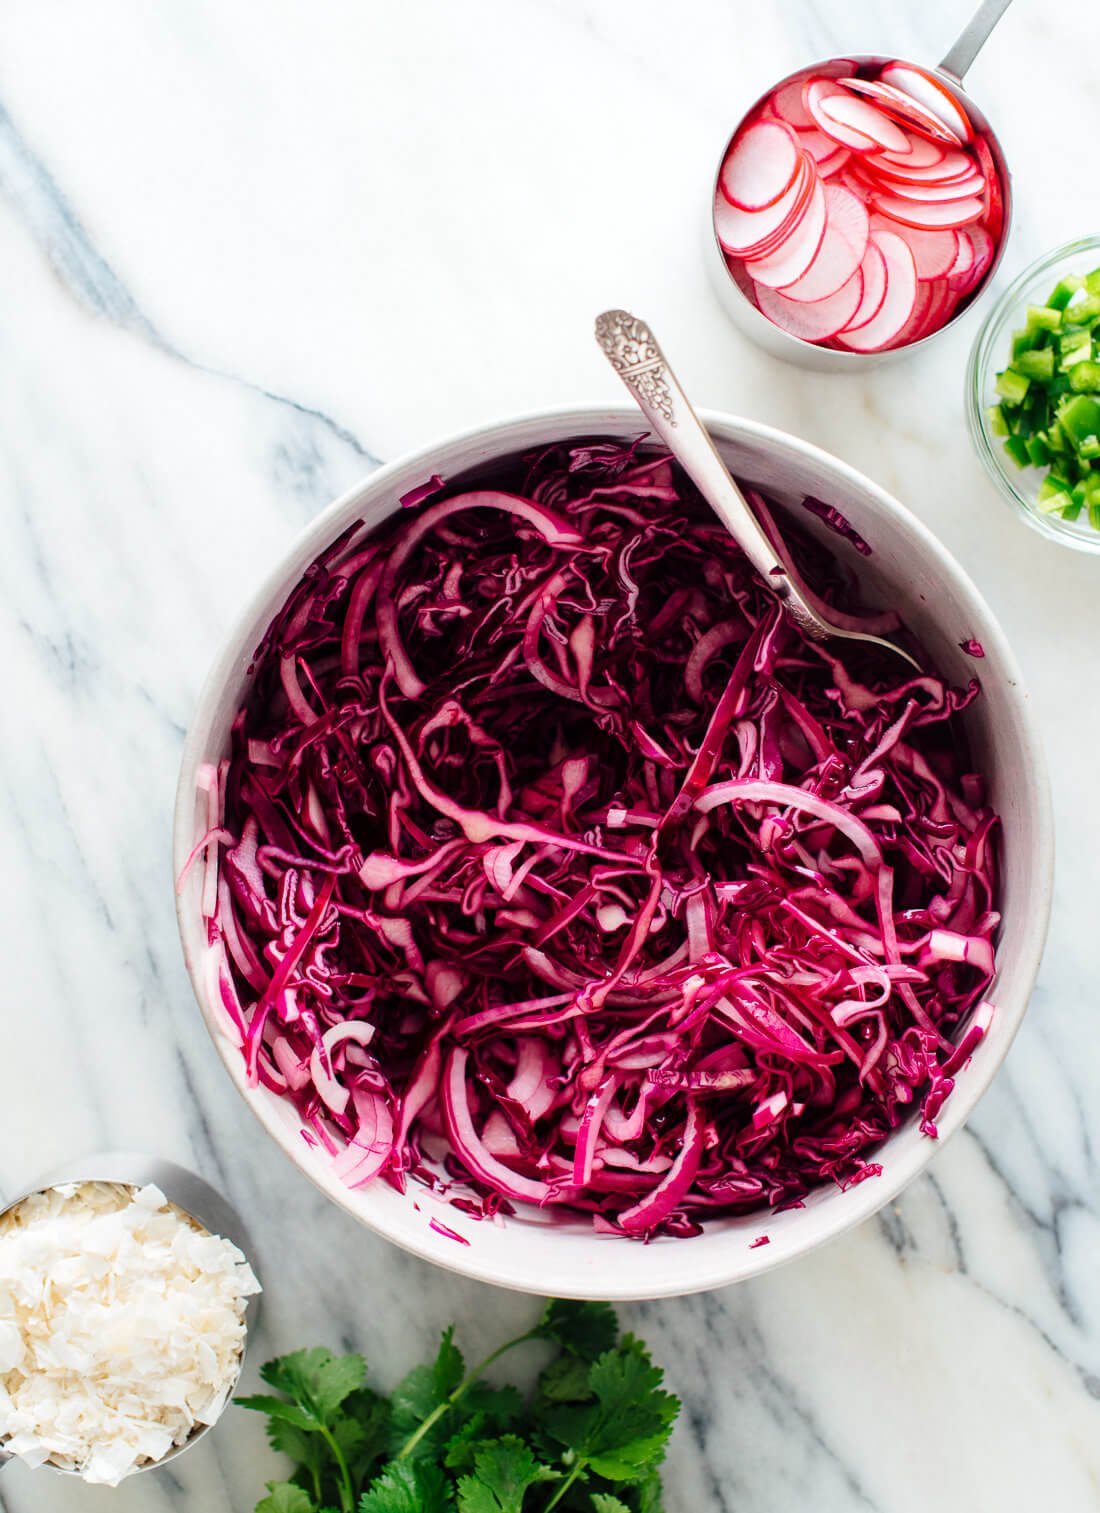 coconut slaw components